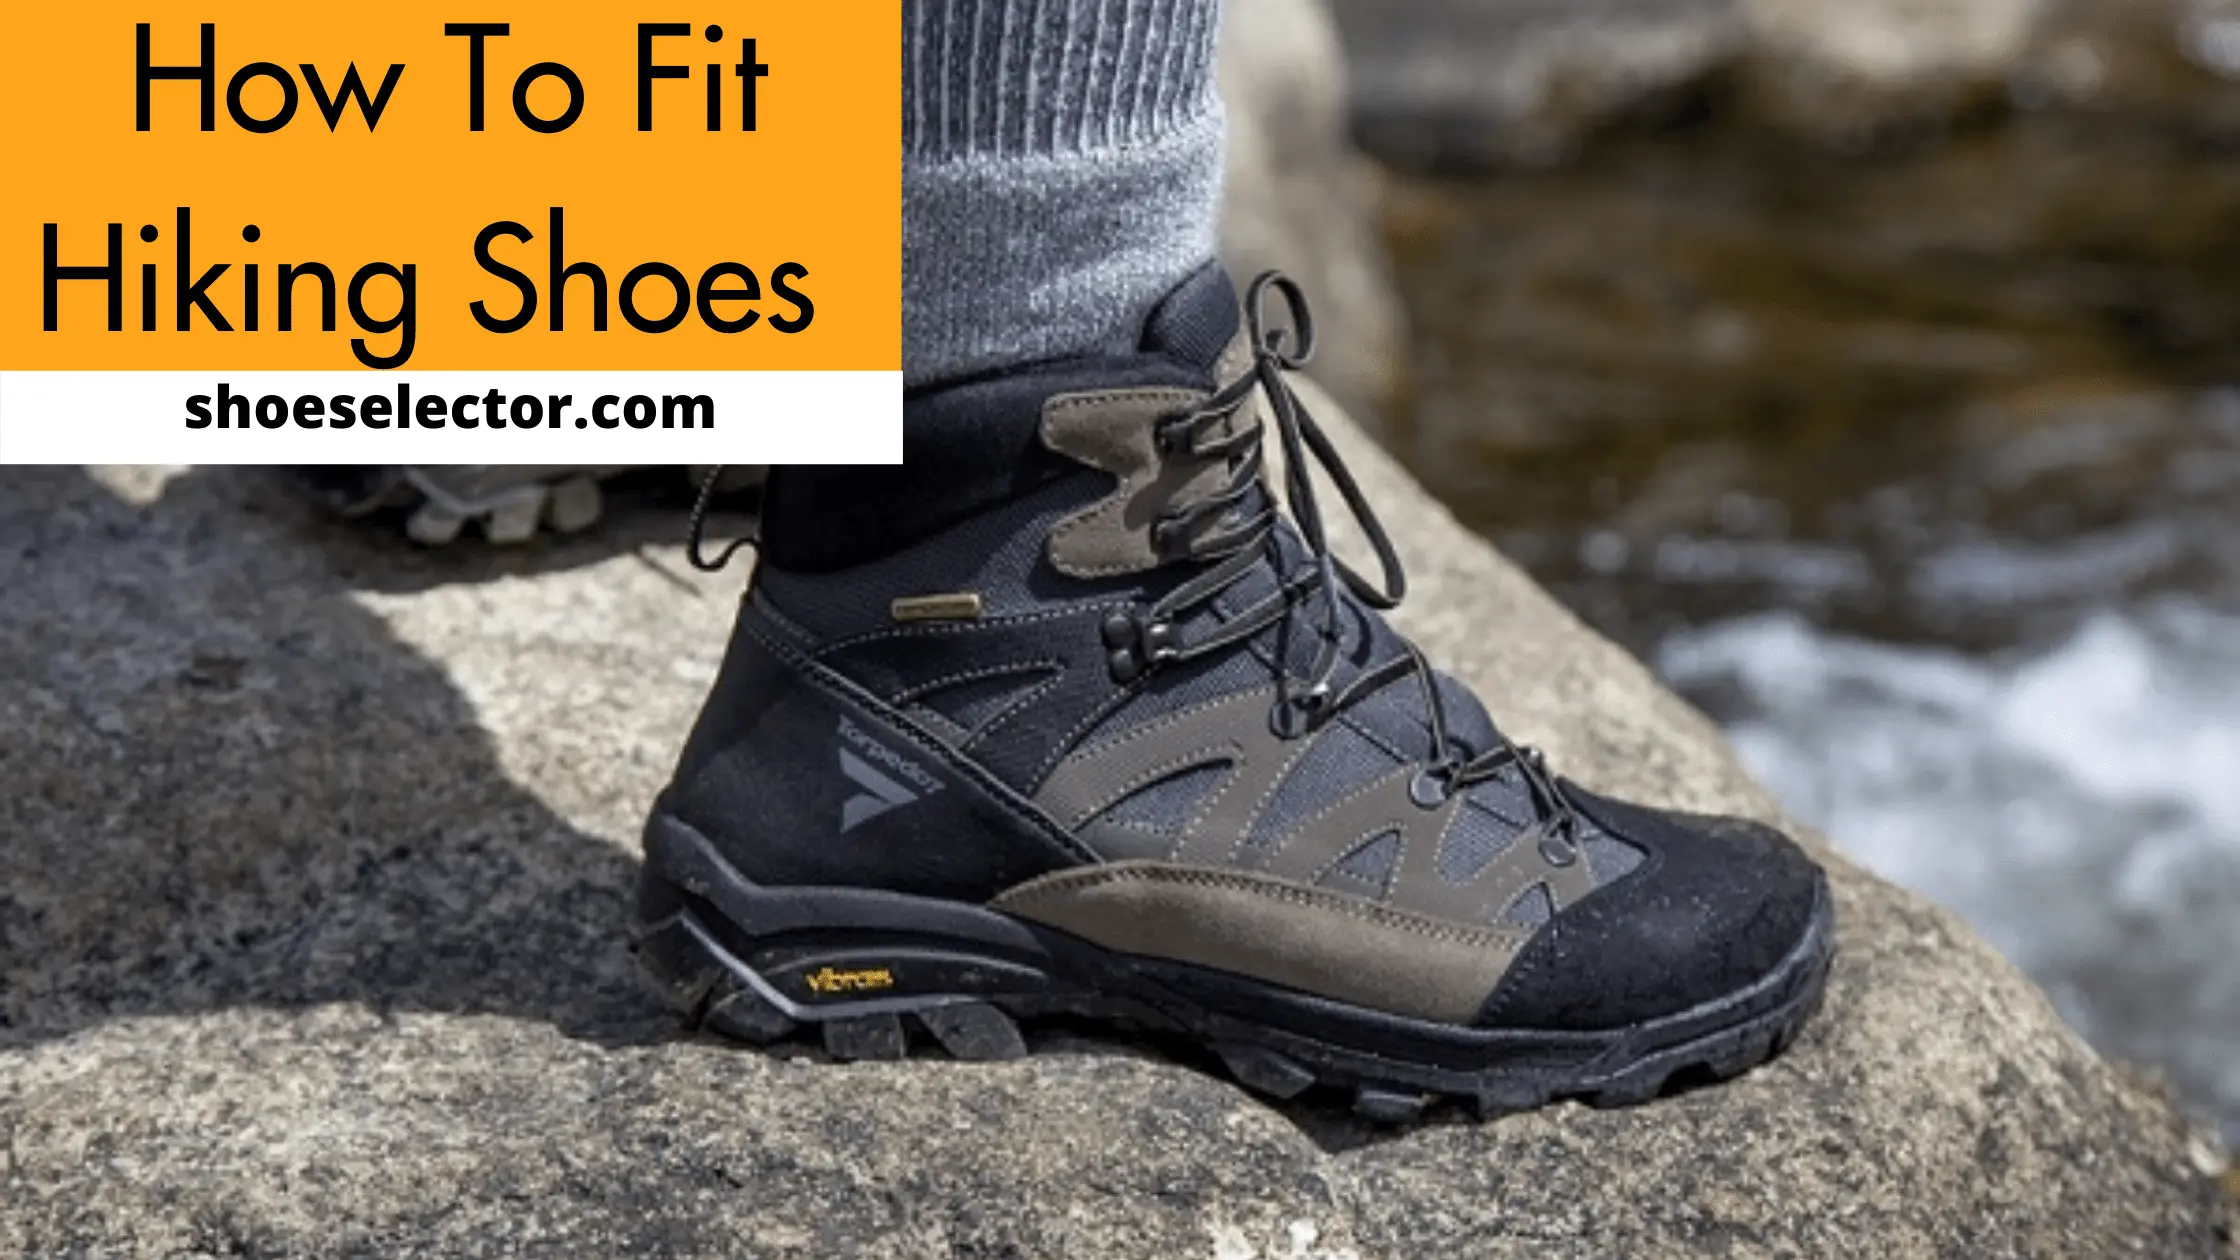  How To Fit Hiking Shoes?